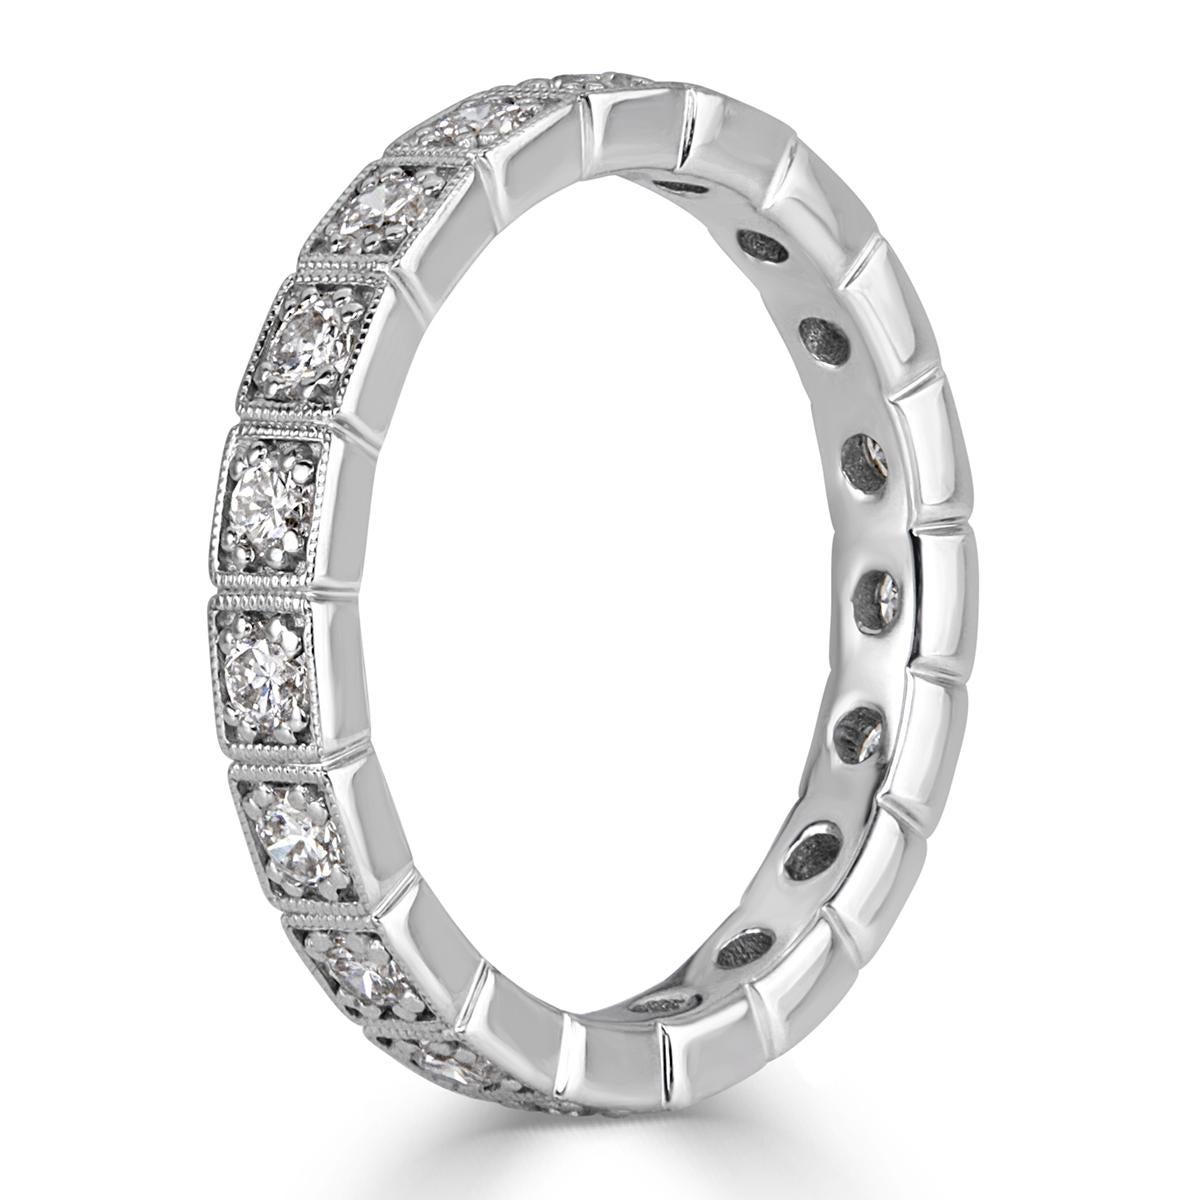 This gorgeous diamond eternity band showcases 0.80ct of round brilliant cut diamonds graded at E-F in color, VS1-VS2 in clarity, measuring at 2.9mm. The diamonds are each accented with exquisite milgrain detail throughout and set in a vintage, 18k